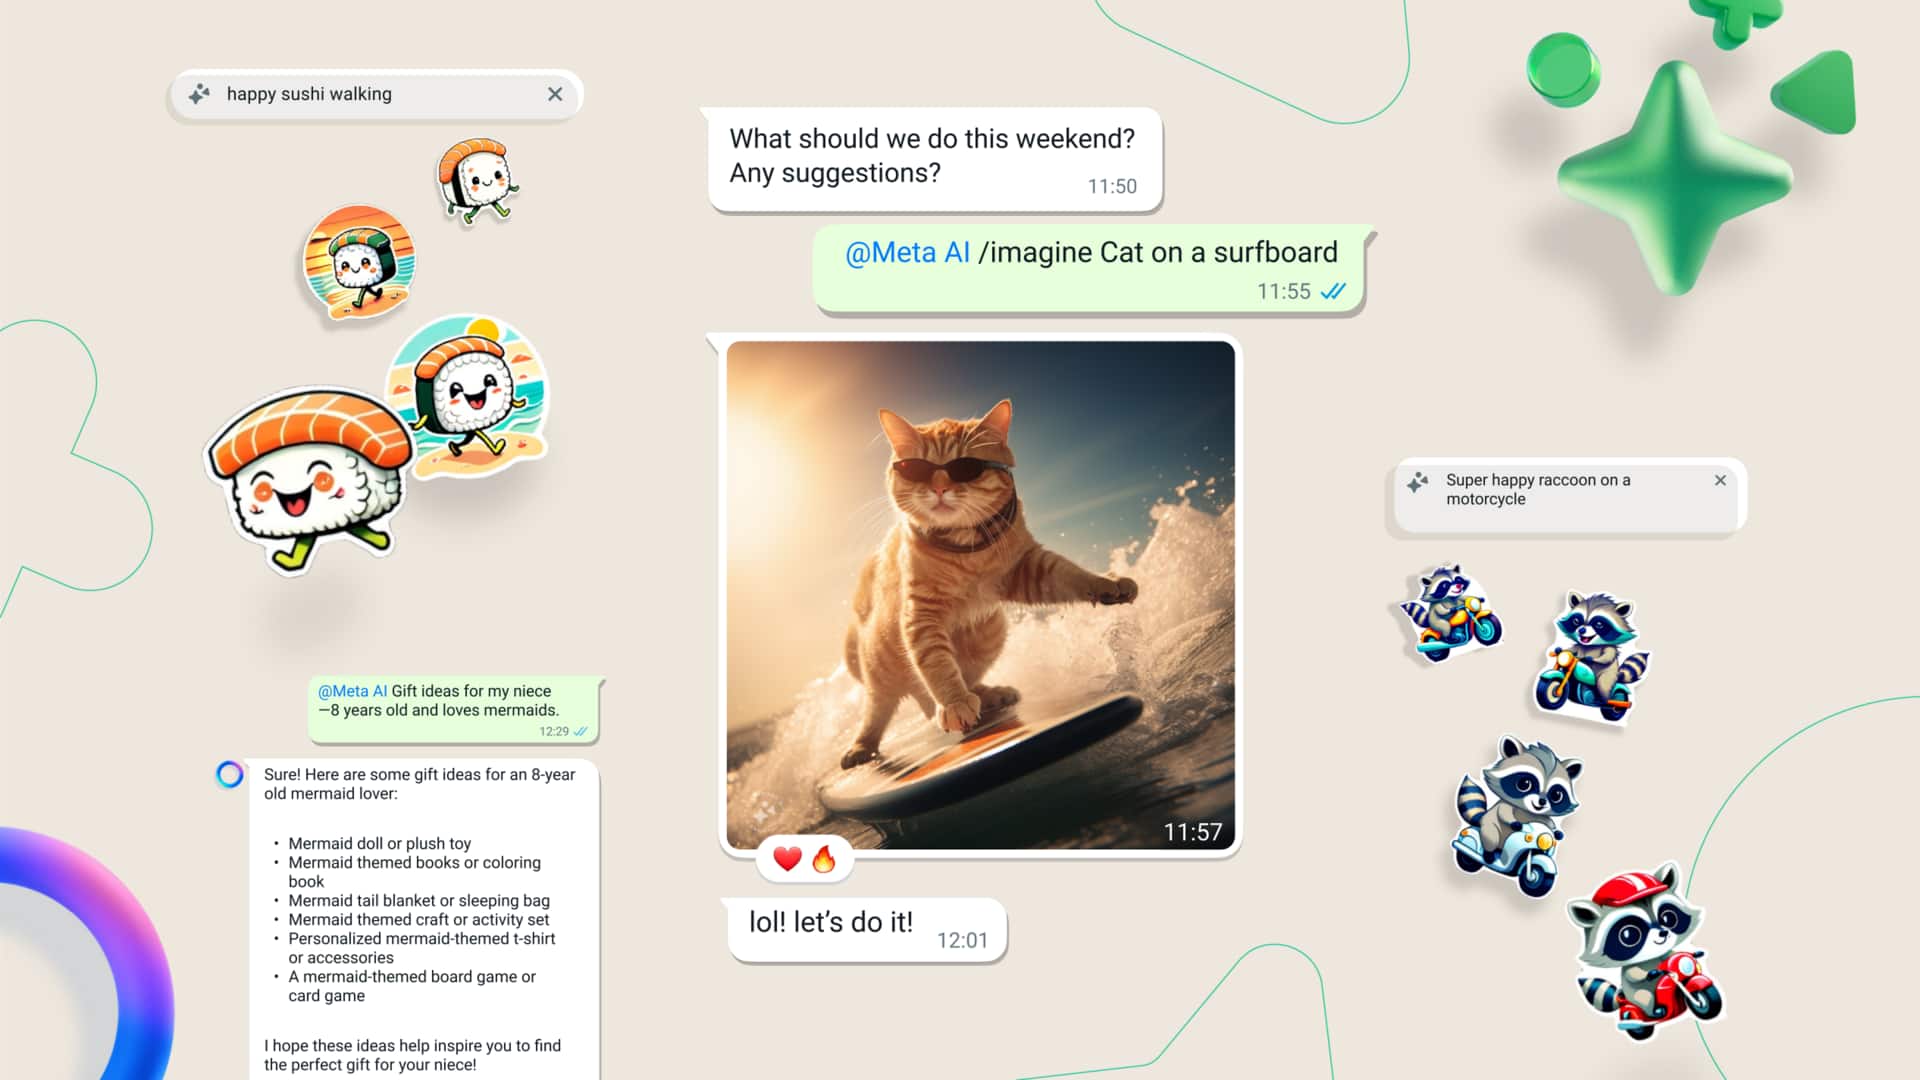 WhatsApp to introduce 'Ask Meta AI' feature: How it works 